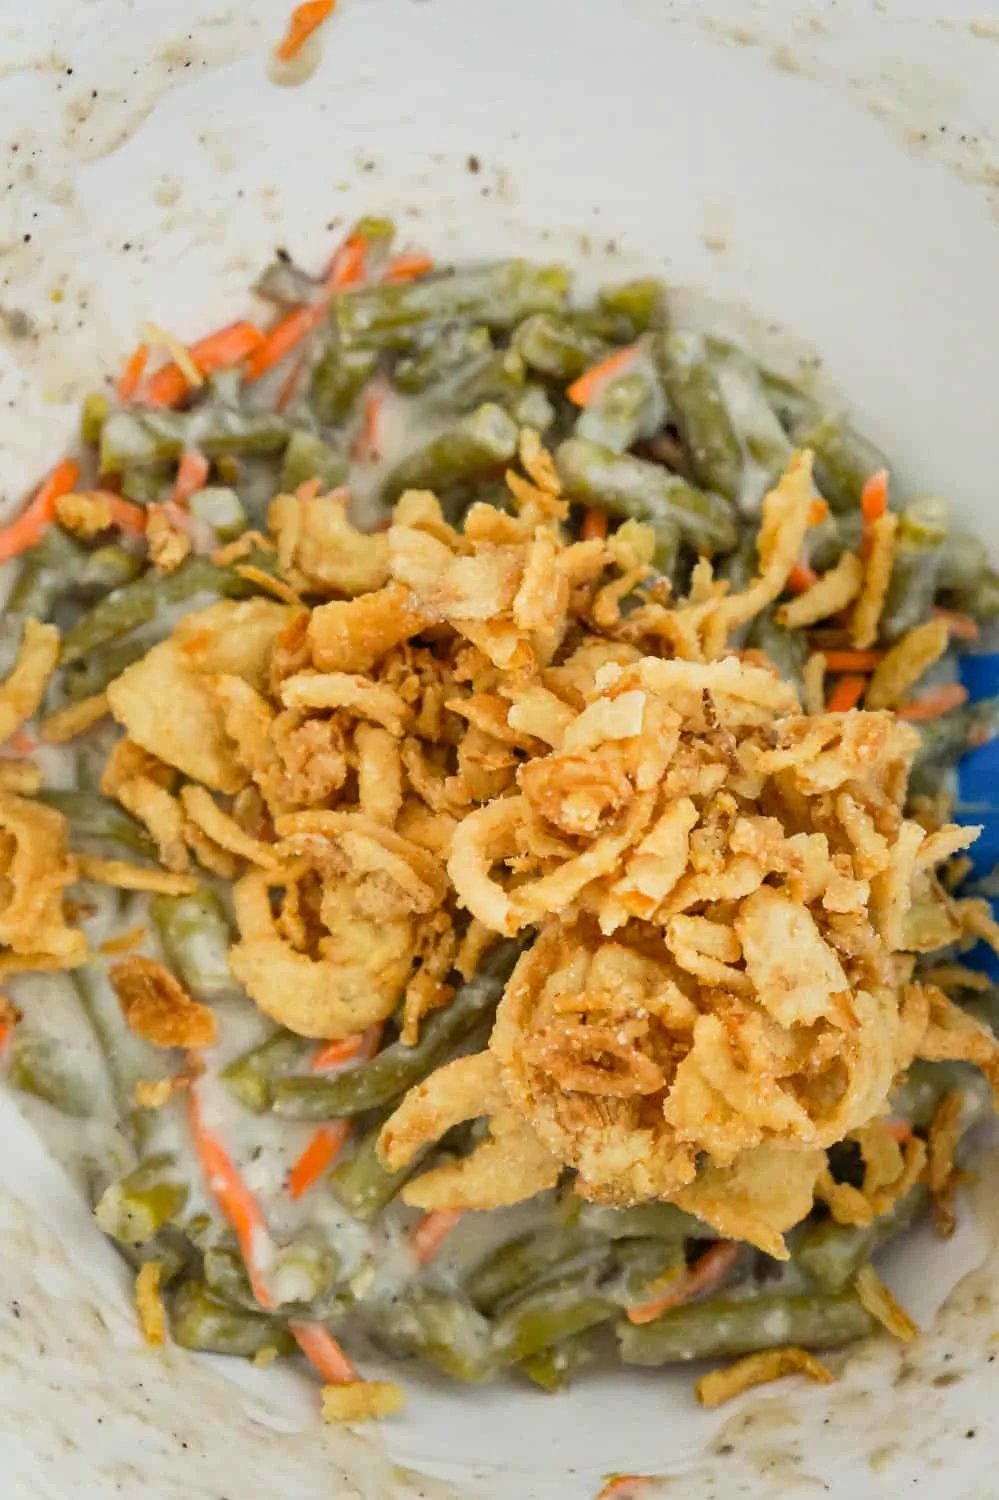 French's fried onions on top of green bean and carrot mixture in a mixing bowl